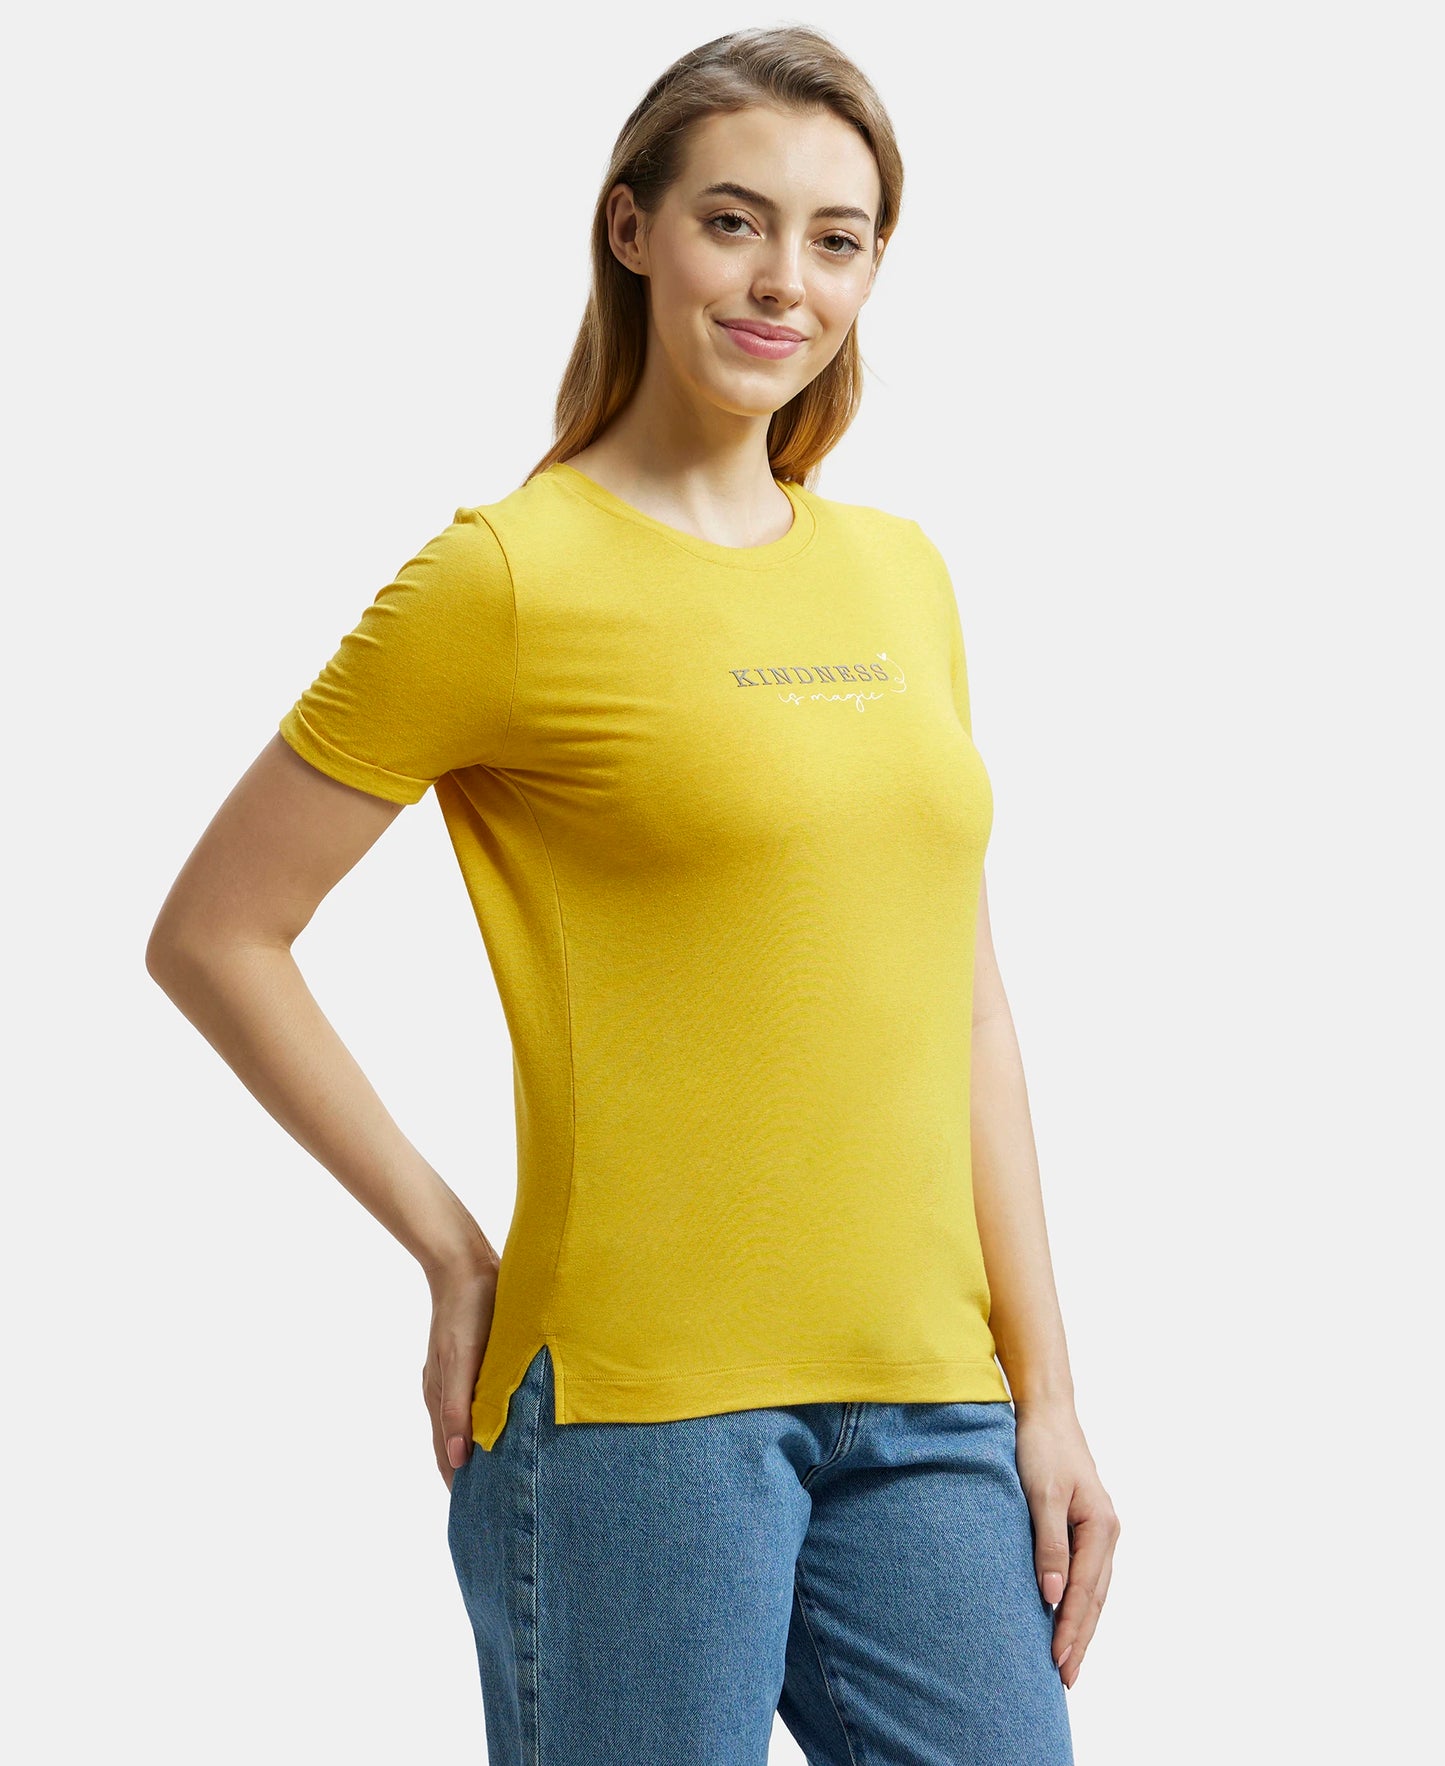 Super Combed Cotton Rich Elastane Relaxed Fit Graphic Printed Round Neck Half Sleeve T-Shirt - Golden Rod Melange-2